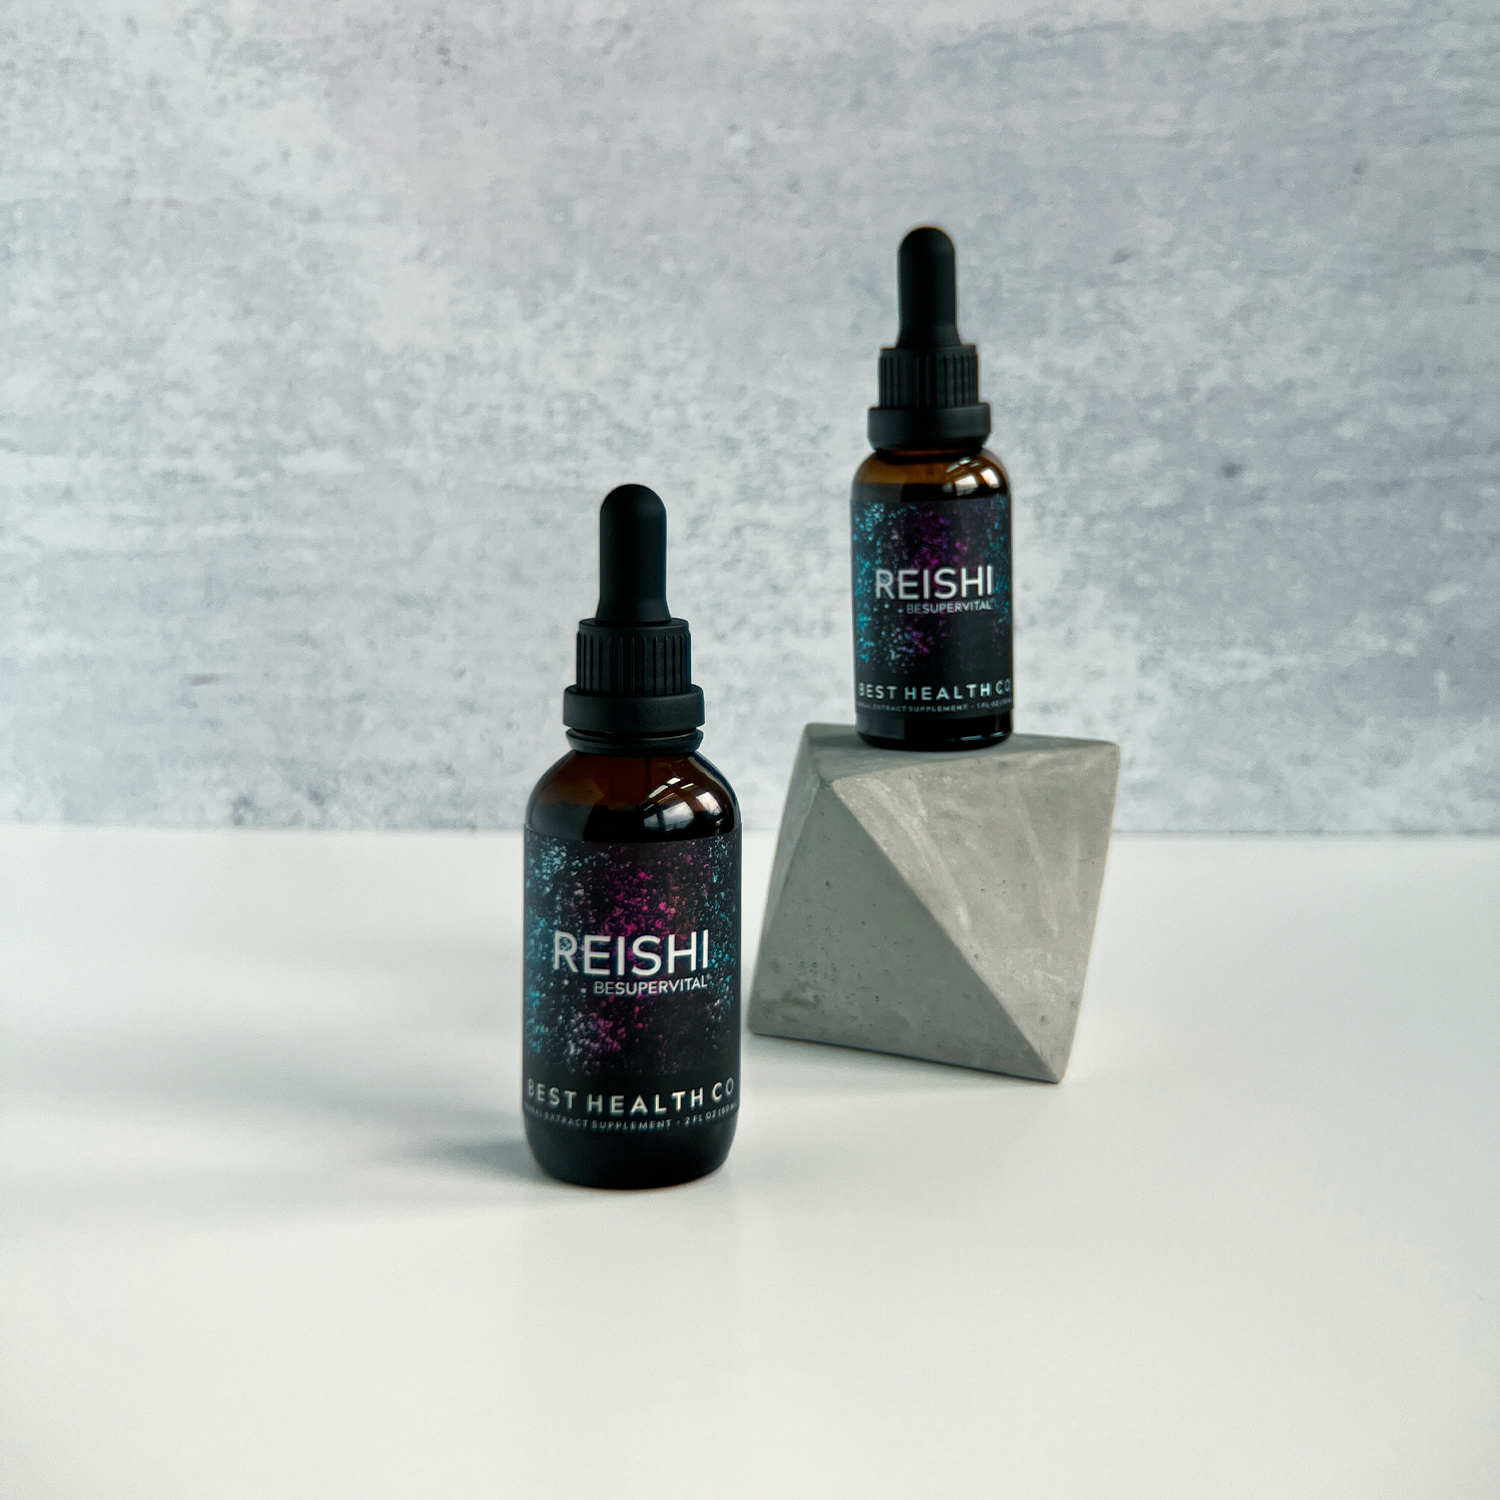 REISHI both 2 oz (60mL) and 1oz (30mL) sizes from Best Health Co.